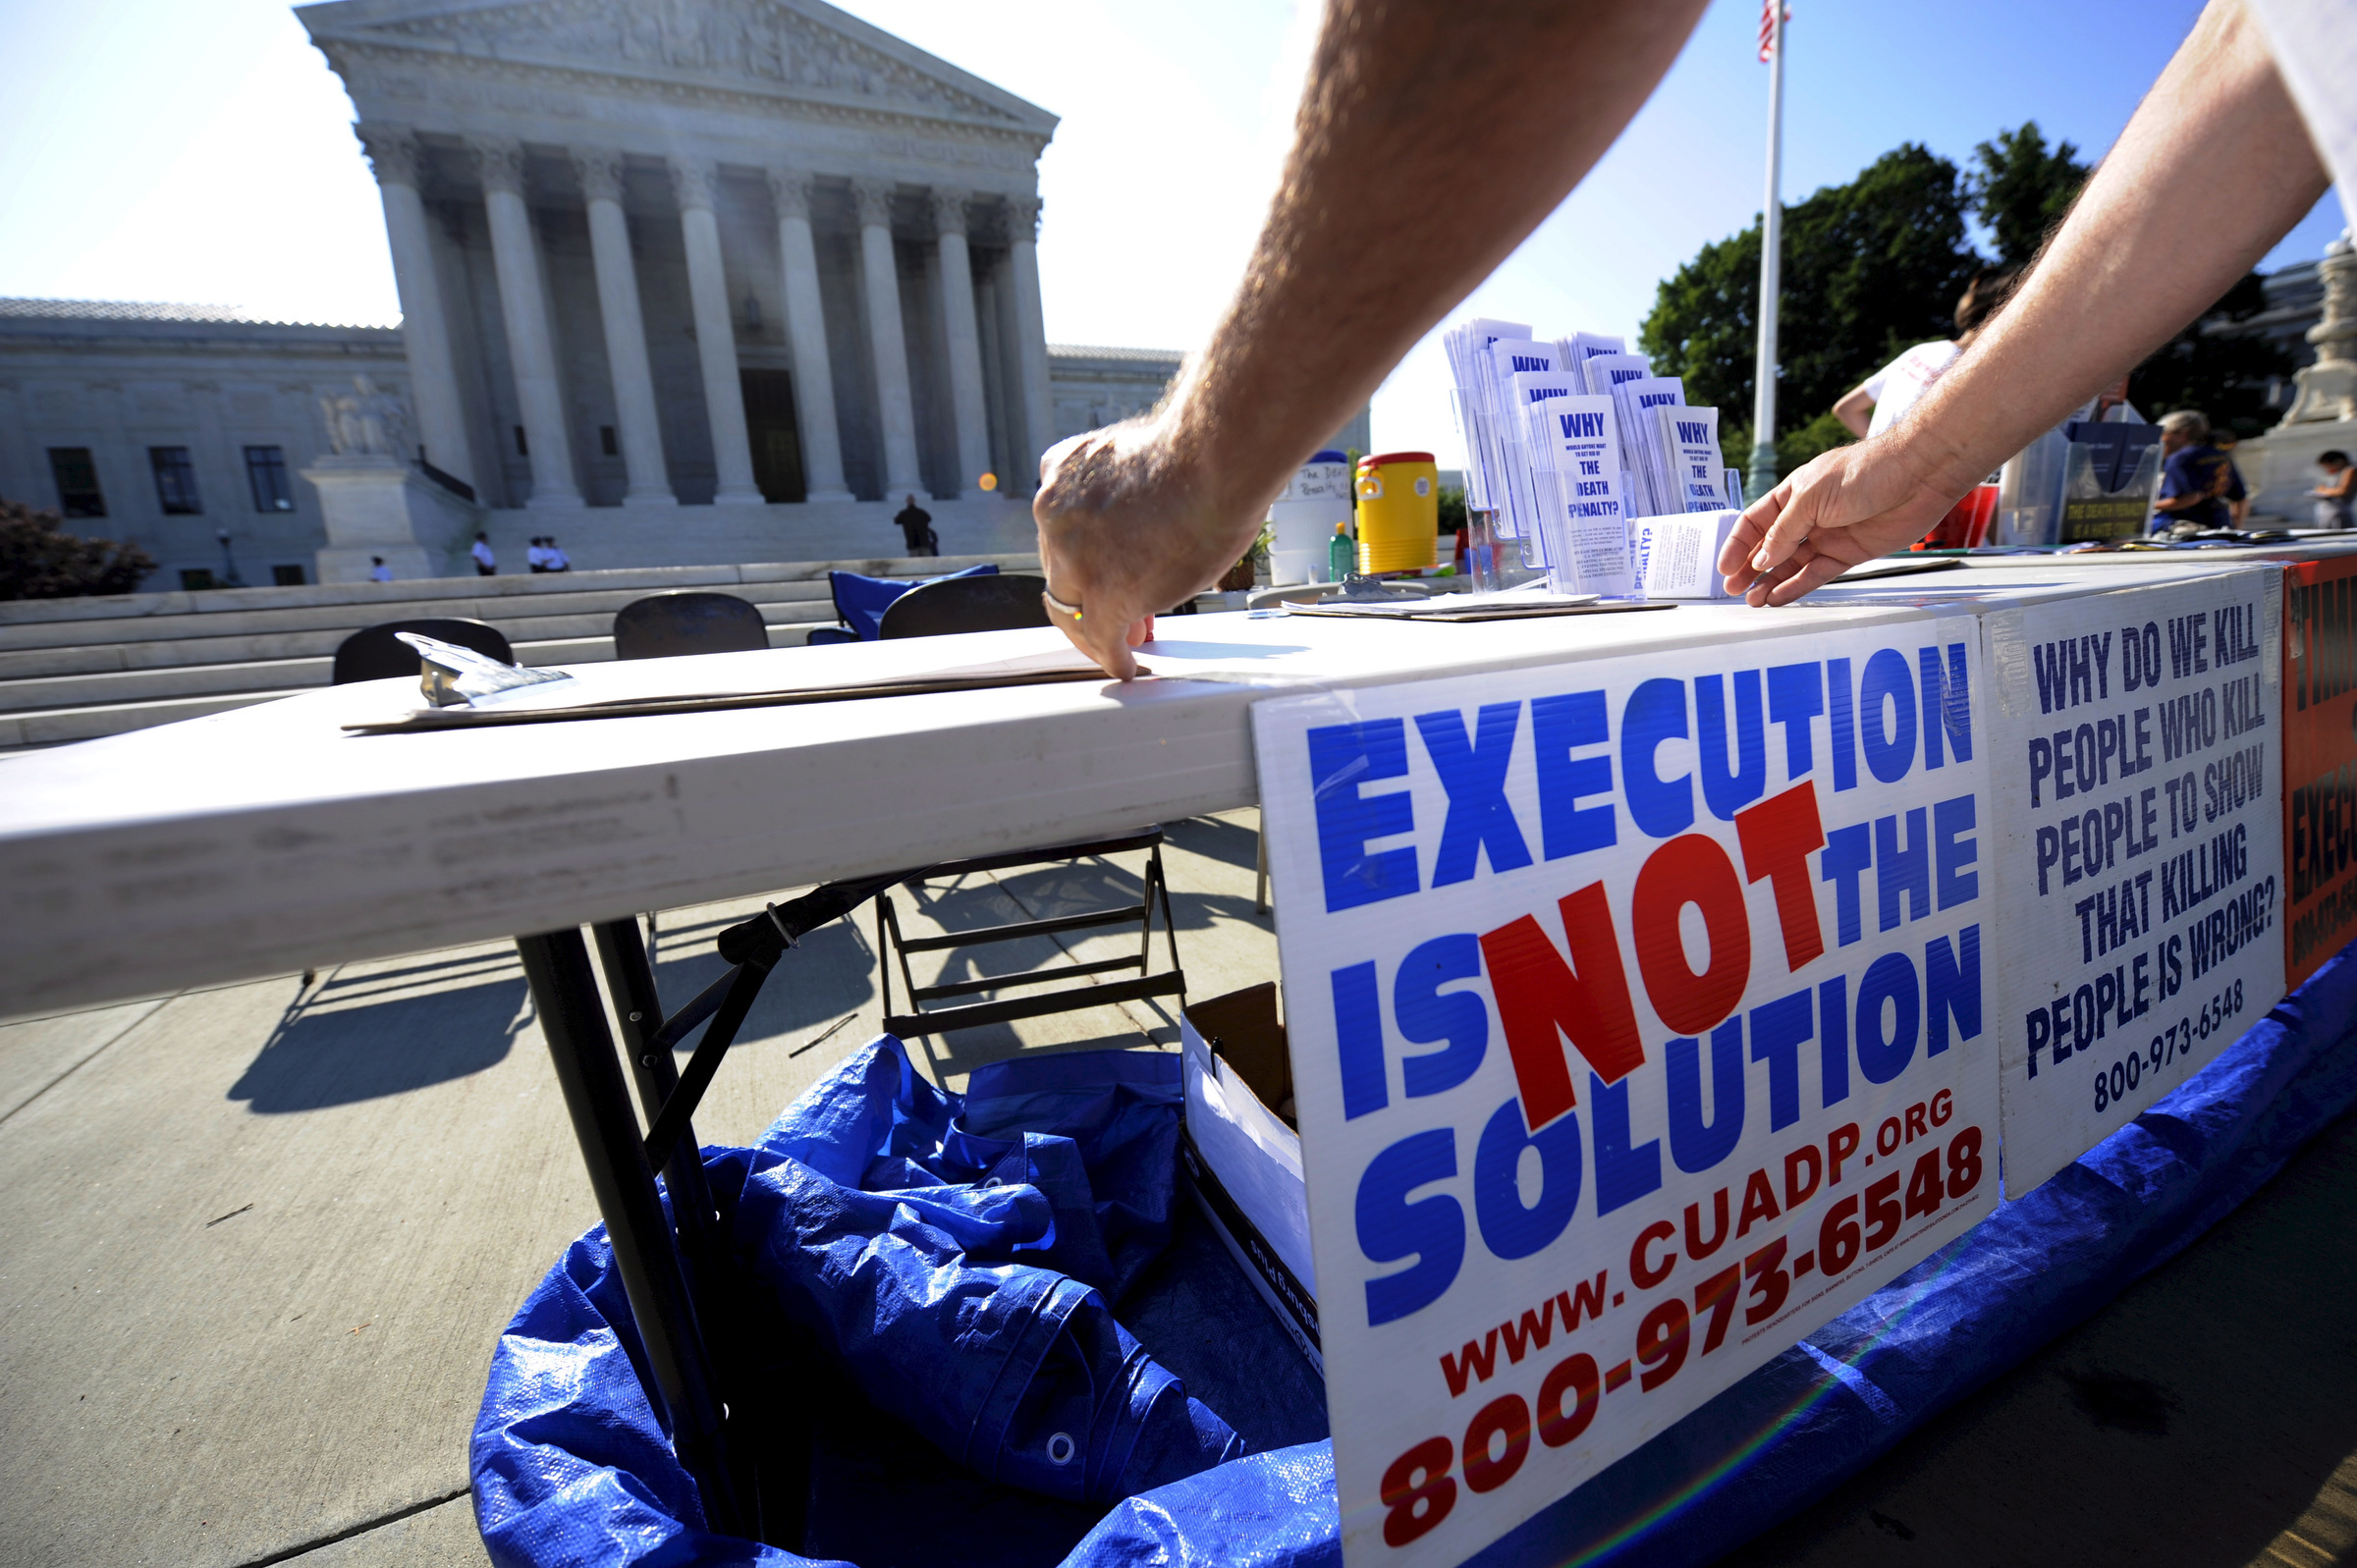 A member of the Abolition Action Committee hangs a sign in front of the Supreme Court in Washington during a 2008 vigil to abolish the death penalty. (CNS photo/Shawn Thew, EPA)